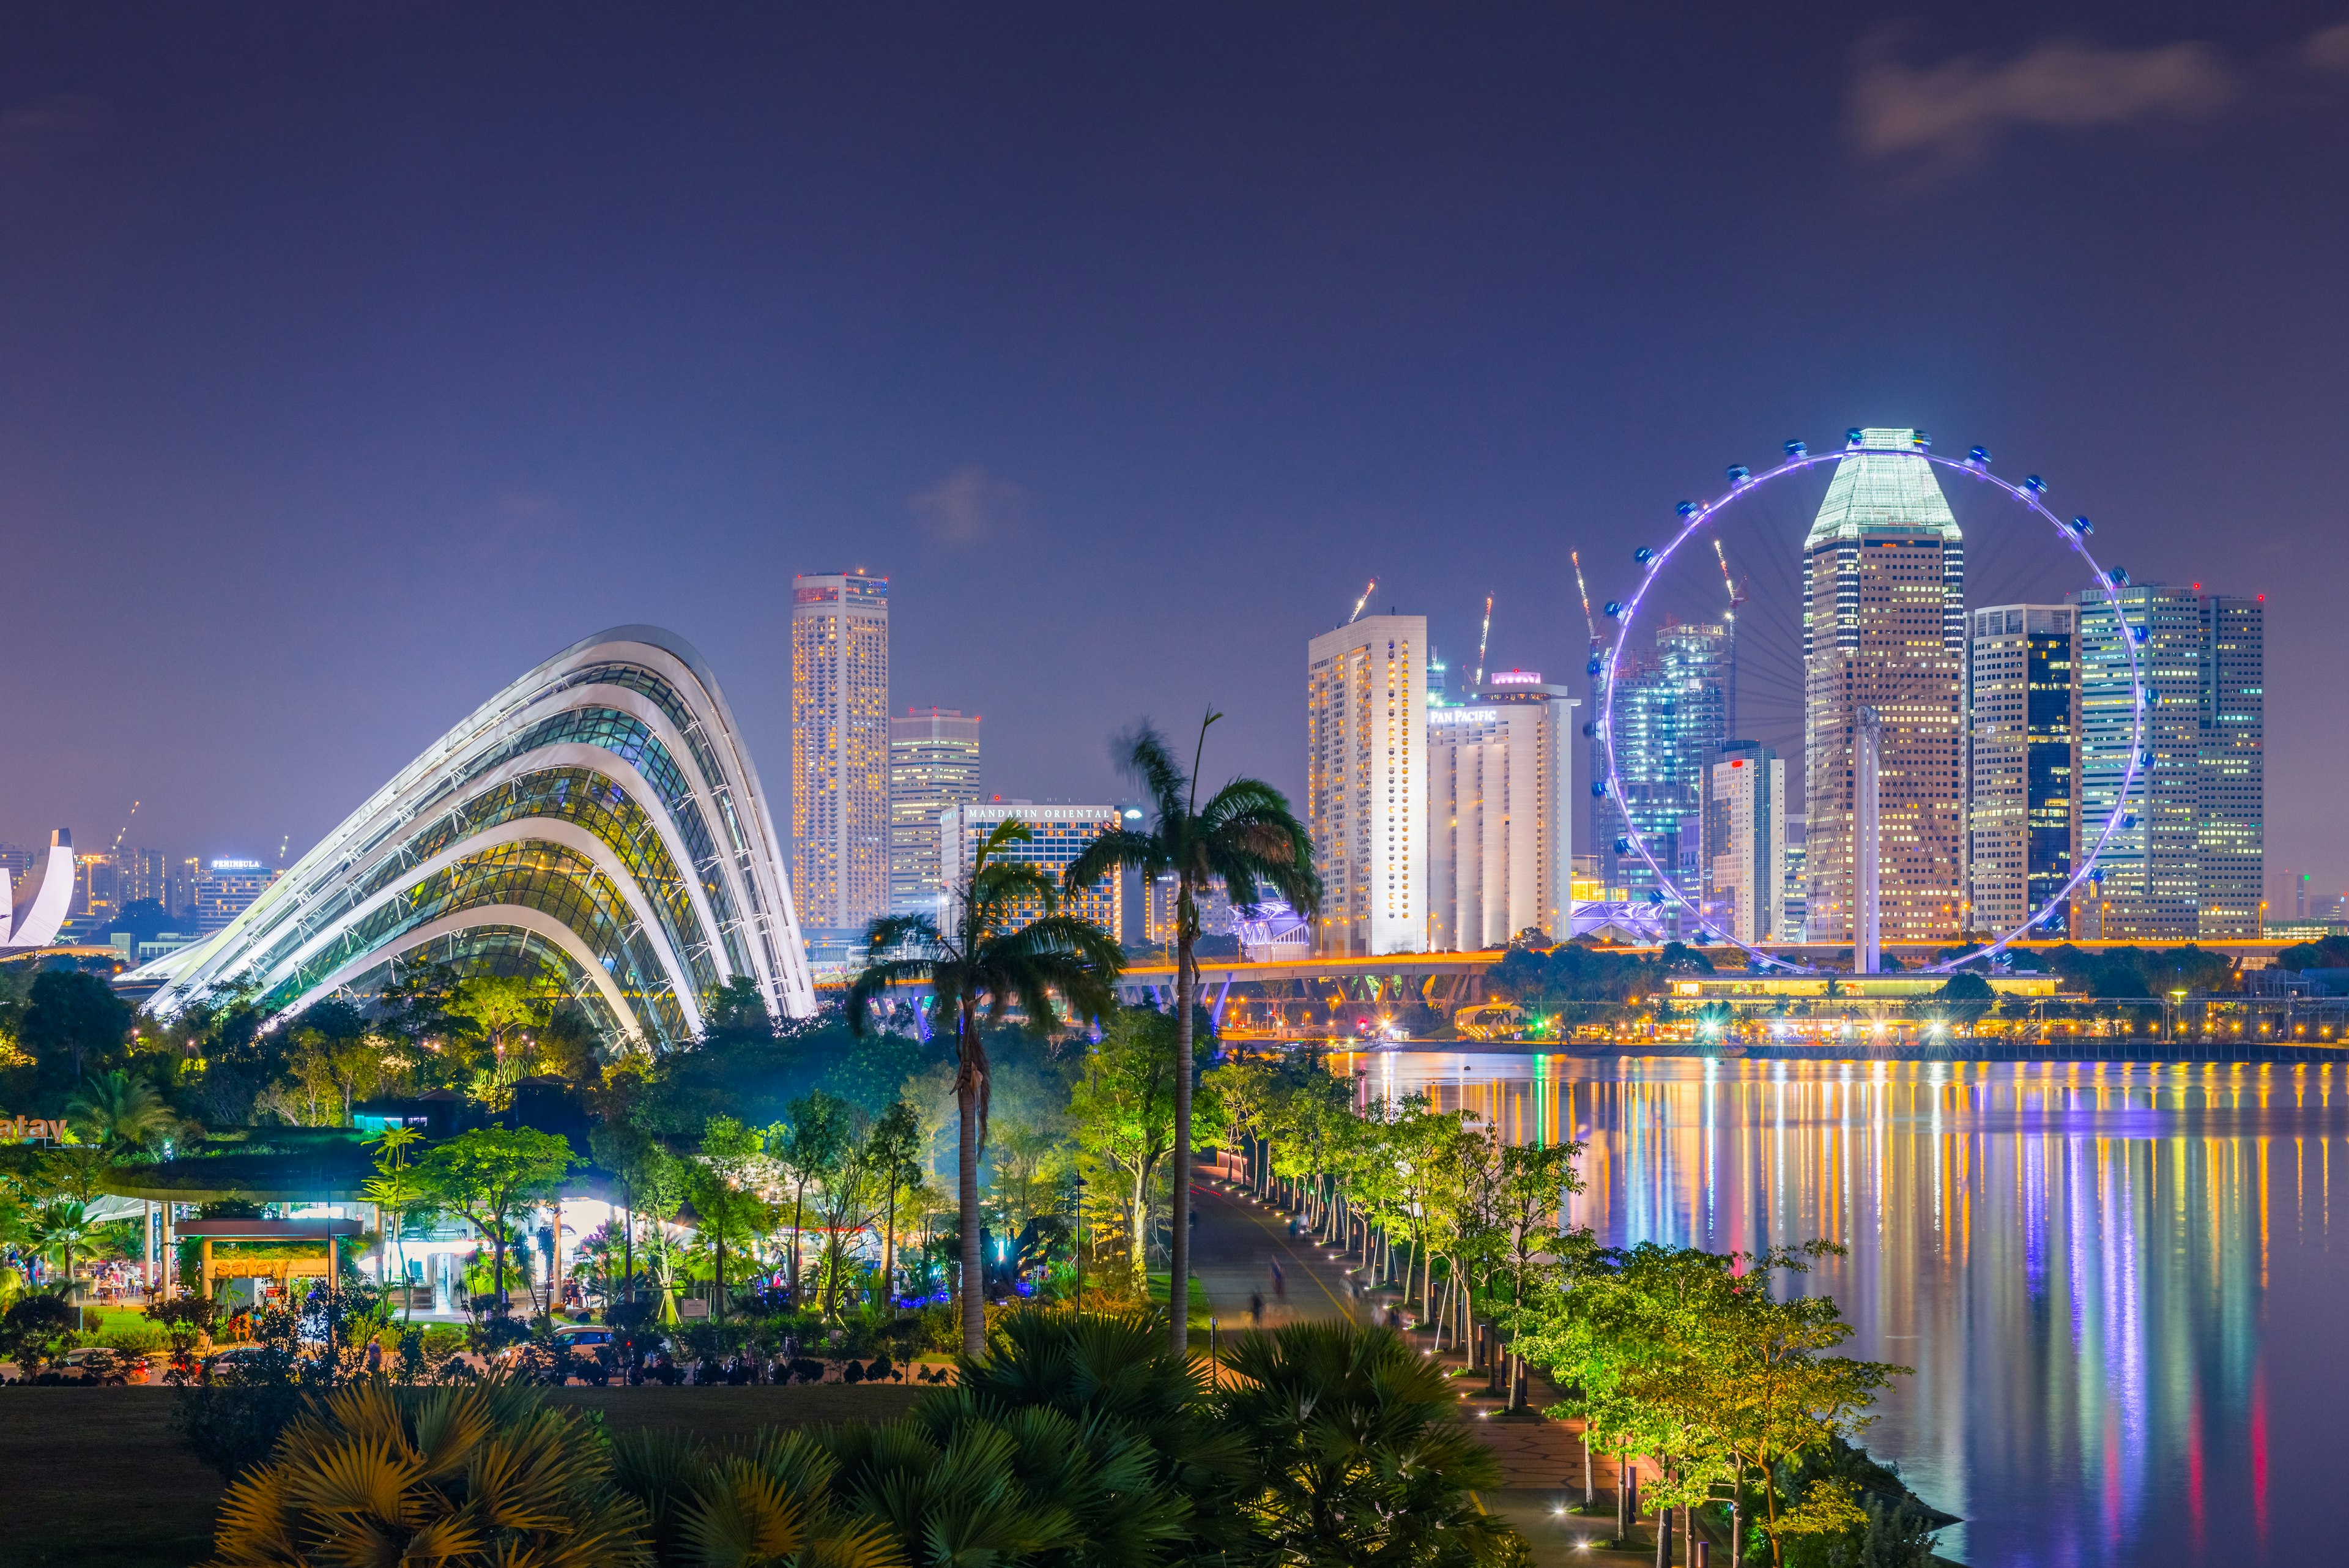 Two advanced architecture structures of Singapore, Flower Dome of Garden by the bay and famous Singapore flyer at night time show fabulous light and color, Singapore